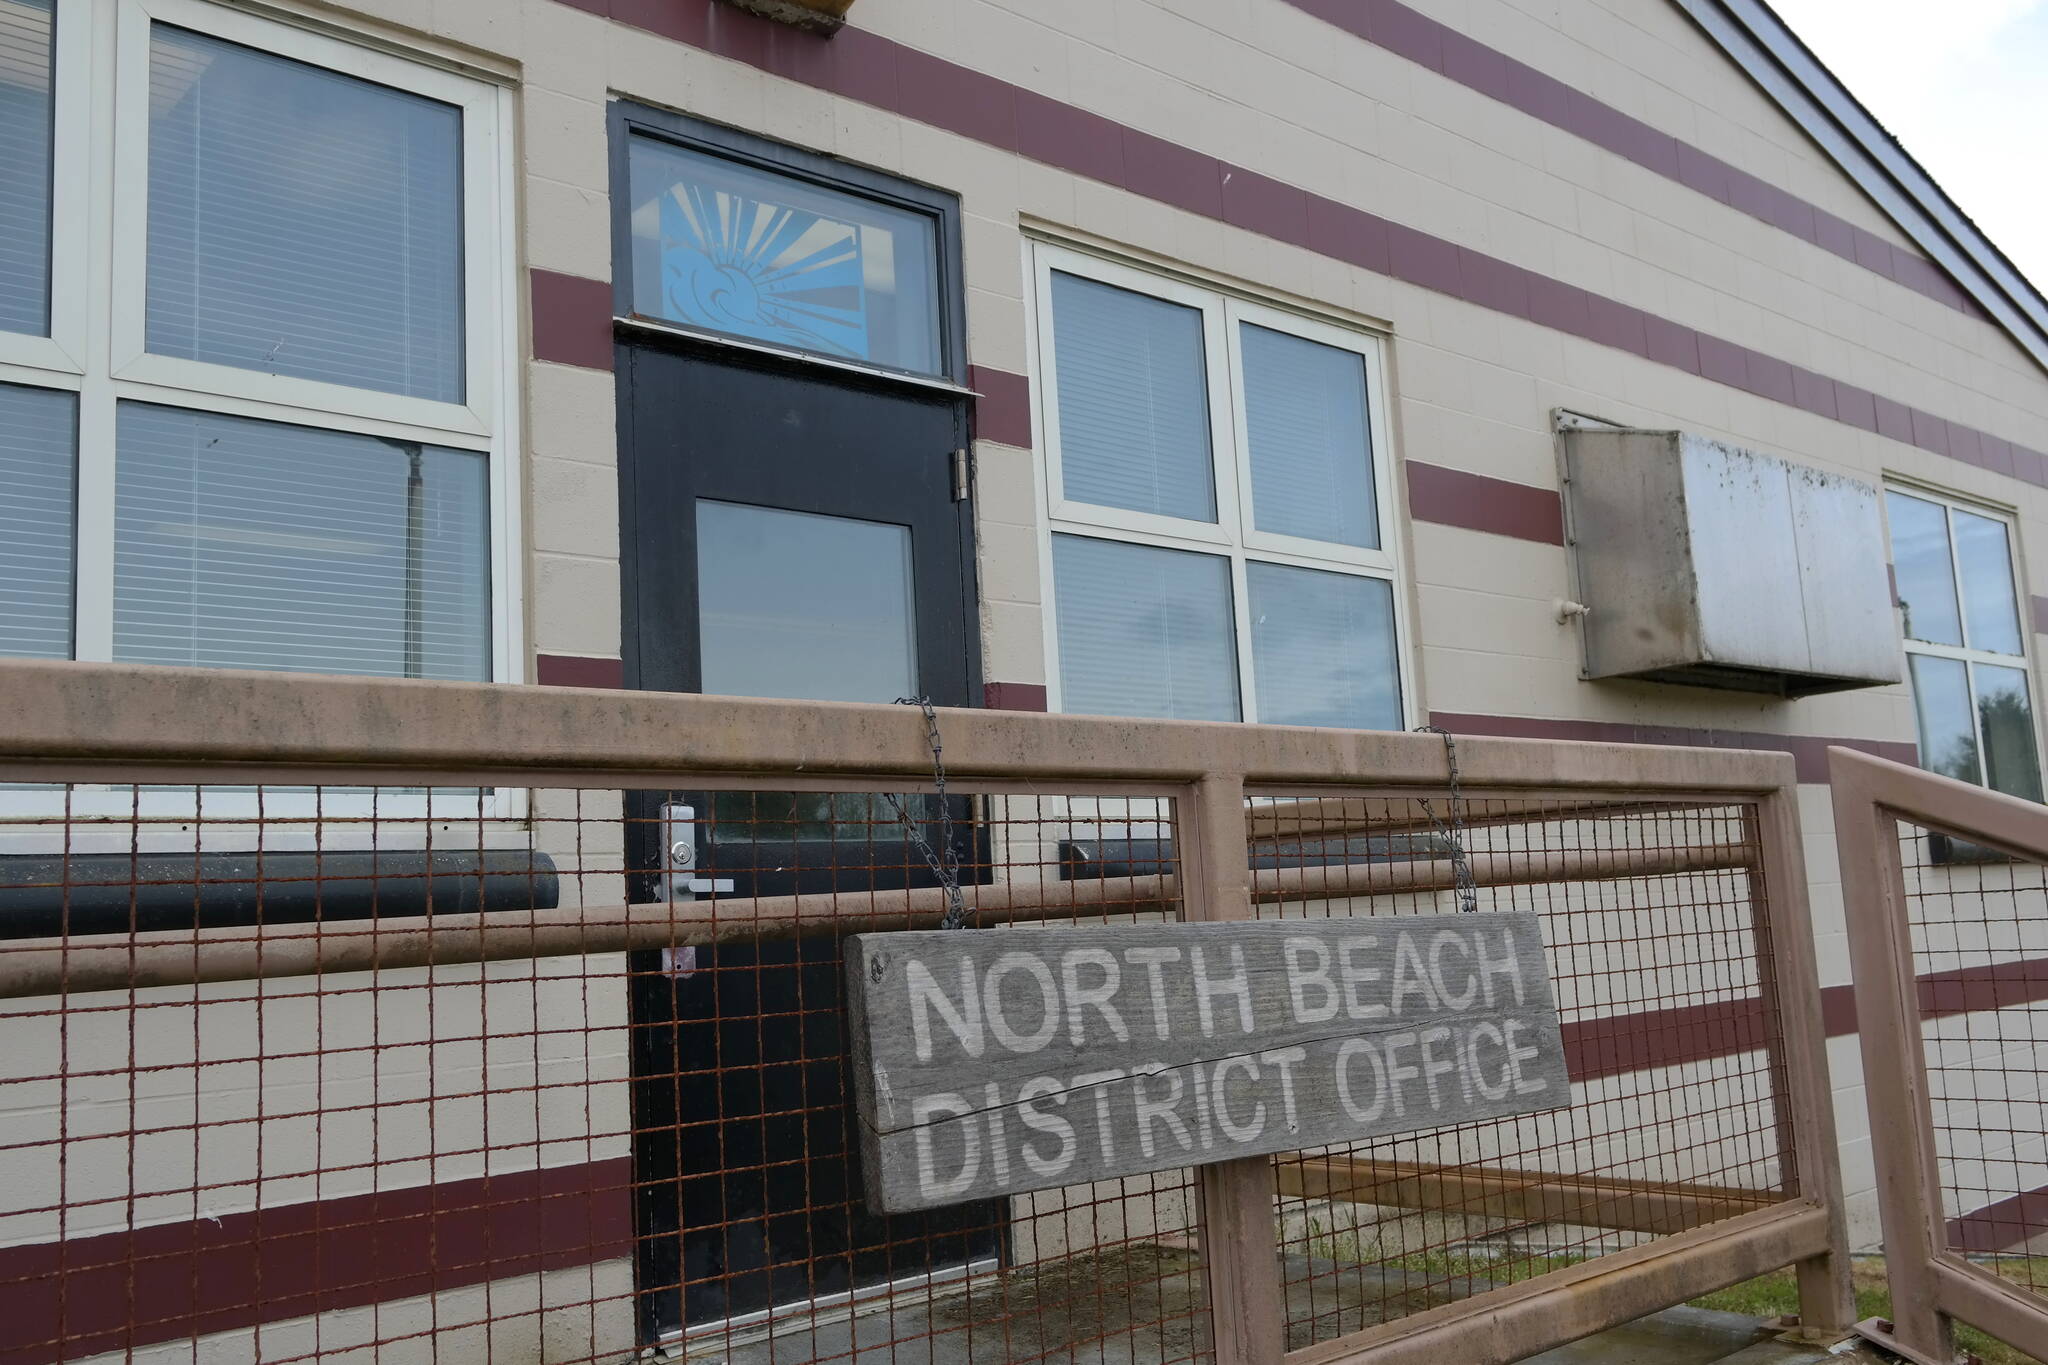 The Daily World file
The North Beach School District is seeking to recover from the “unspeakably hostile climate” that caused three resignations, including the superintendent, last month.